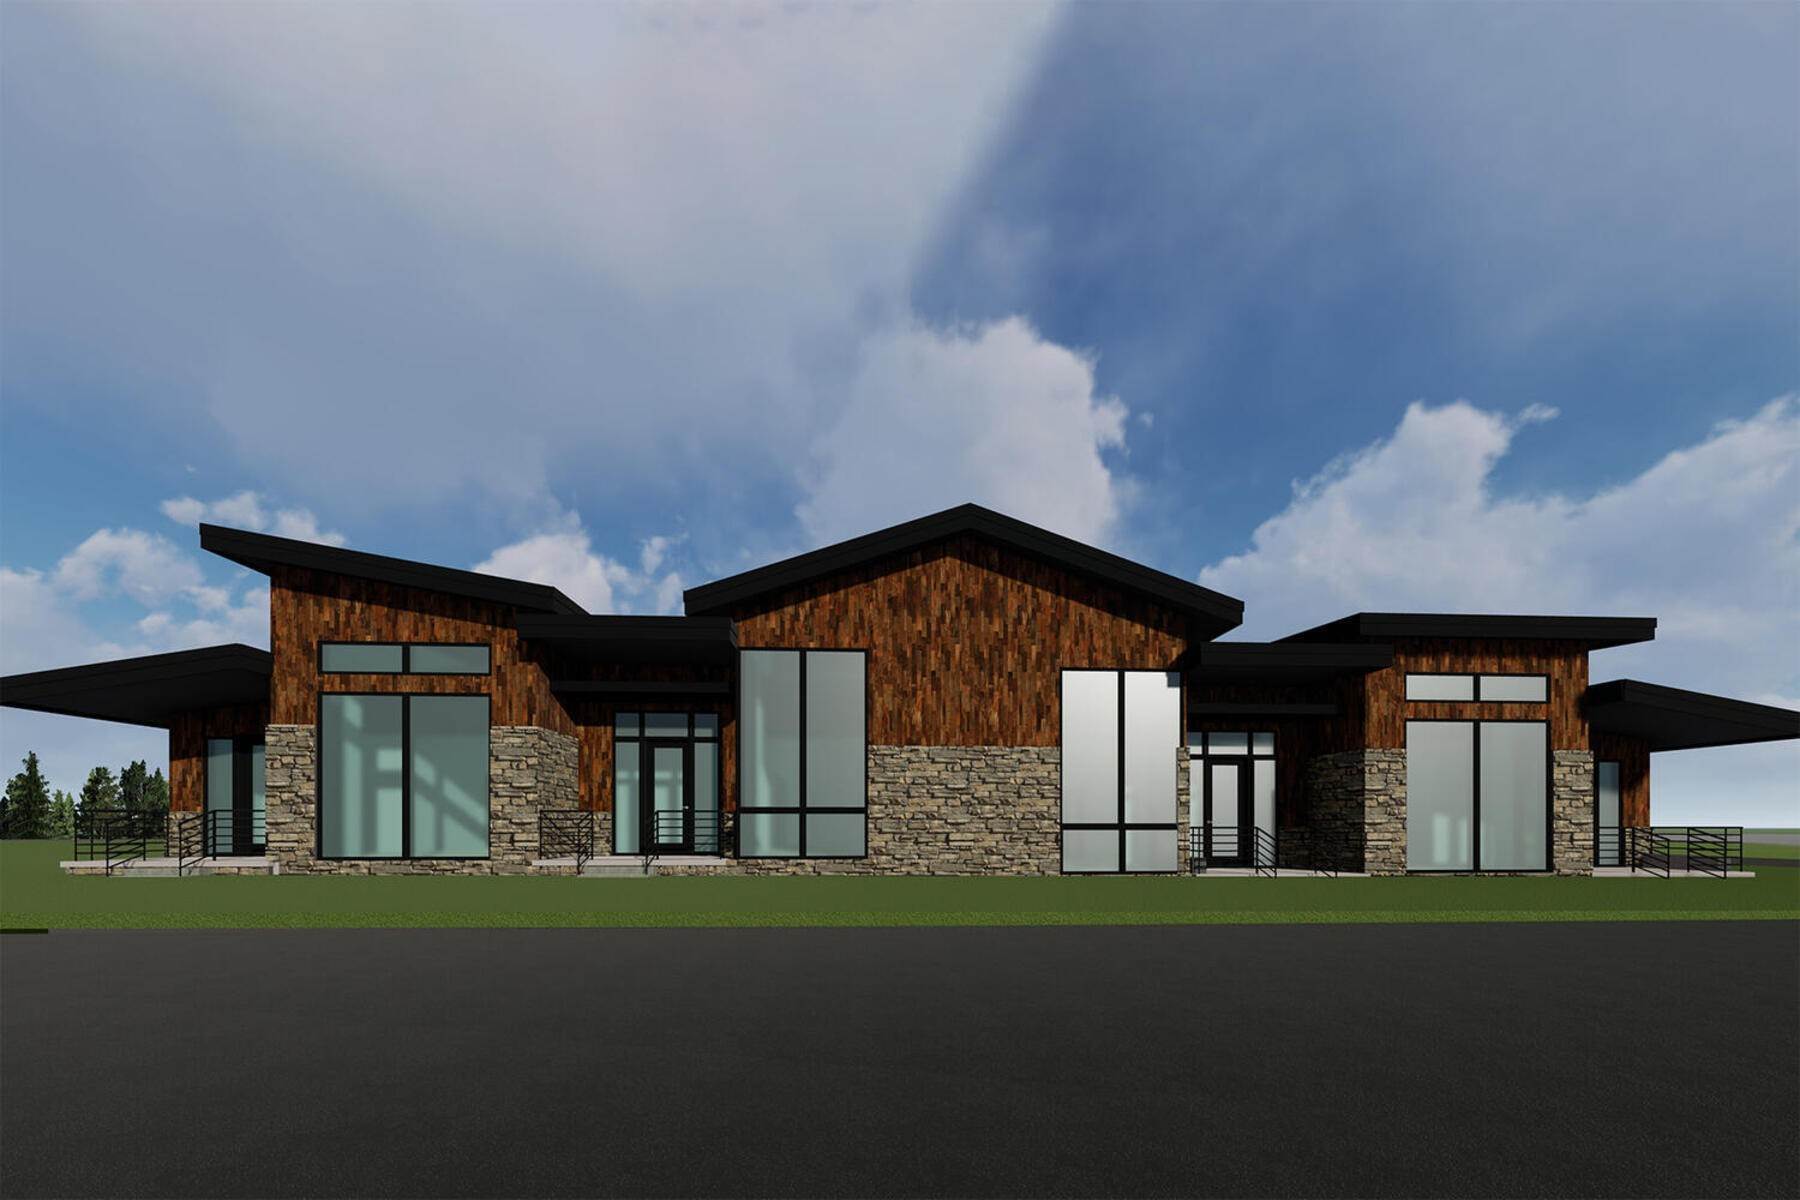 Property for Sale at Coming This Summer! Wasatch Springs Commercial/Mixed-Use Development 1032 W Wasatch Spring Rd #W-4 Kamas, Utah 84036 United States